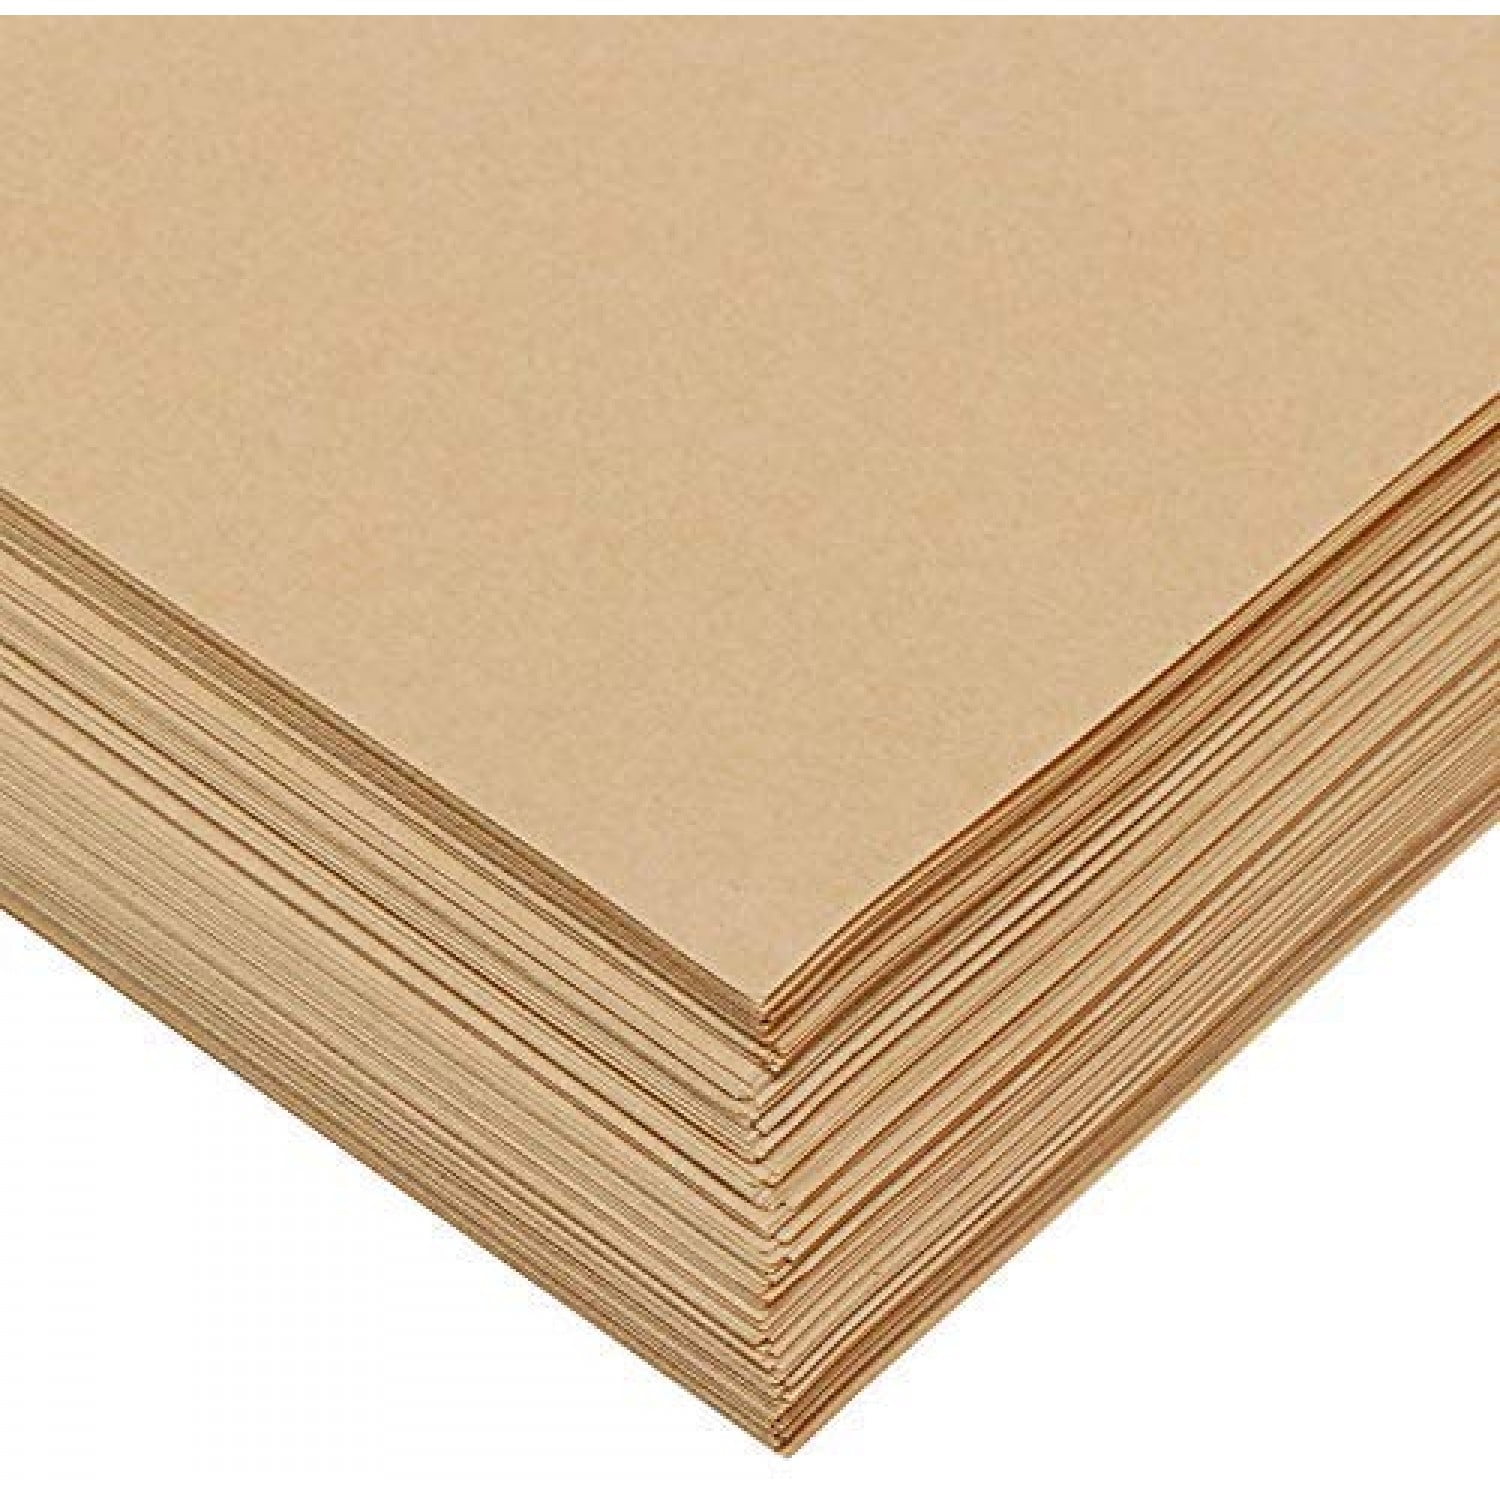 2pack of Pasteles Paper 75 Parchment Paper Sheets 12x12 Inches. 